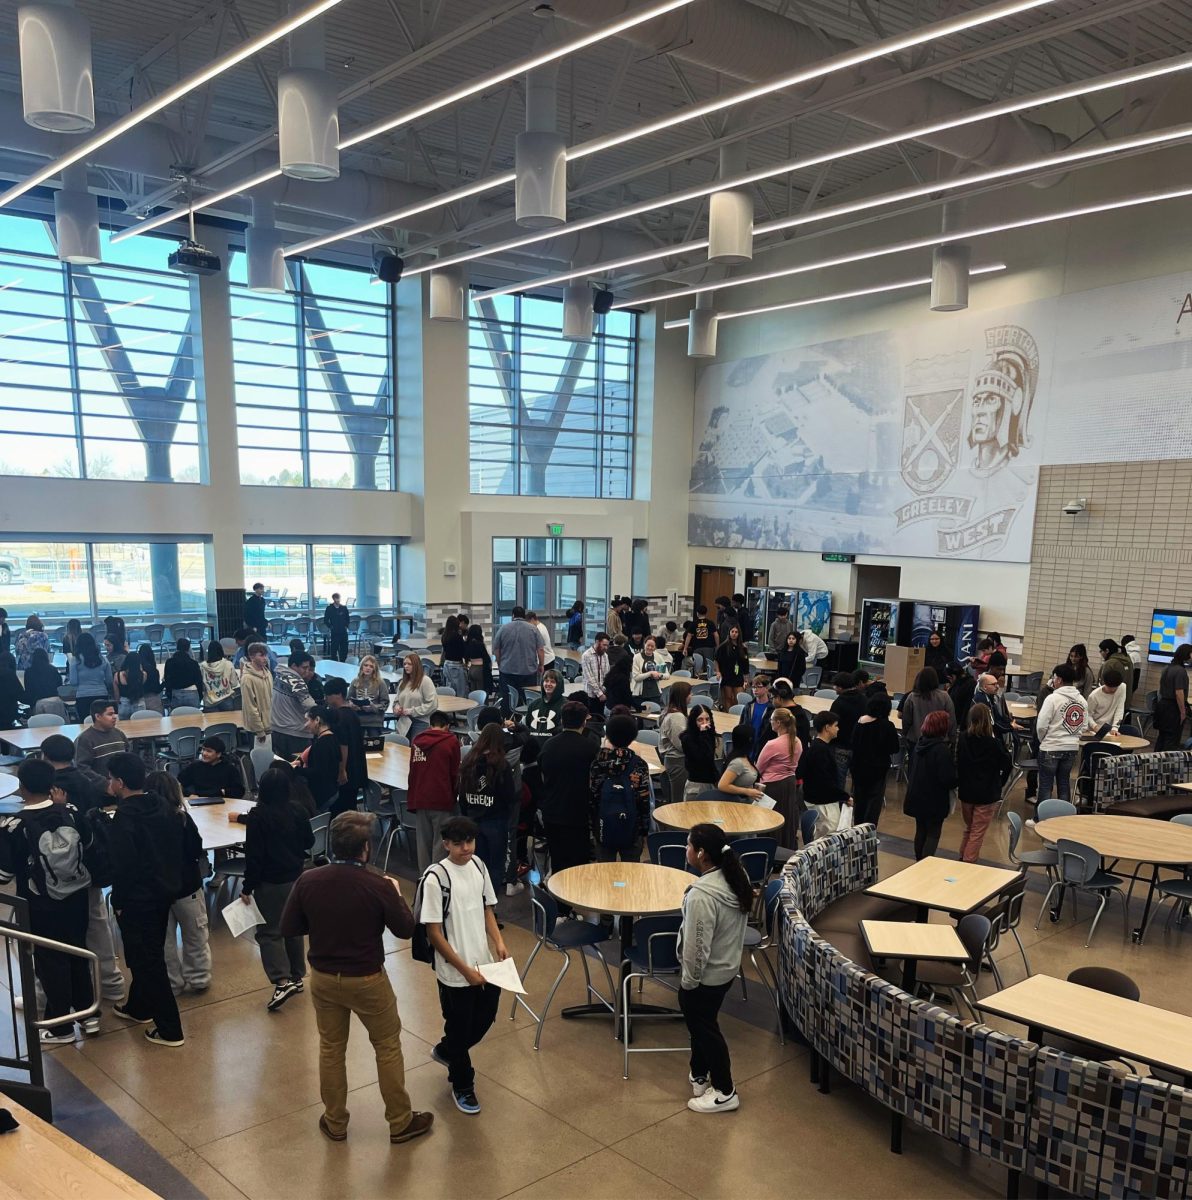 Greeley West sophomores filled the commons last week presenting their personal projects.